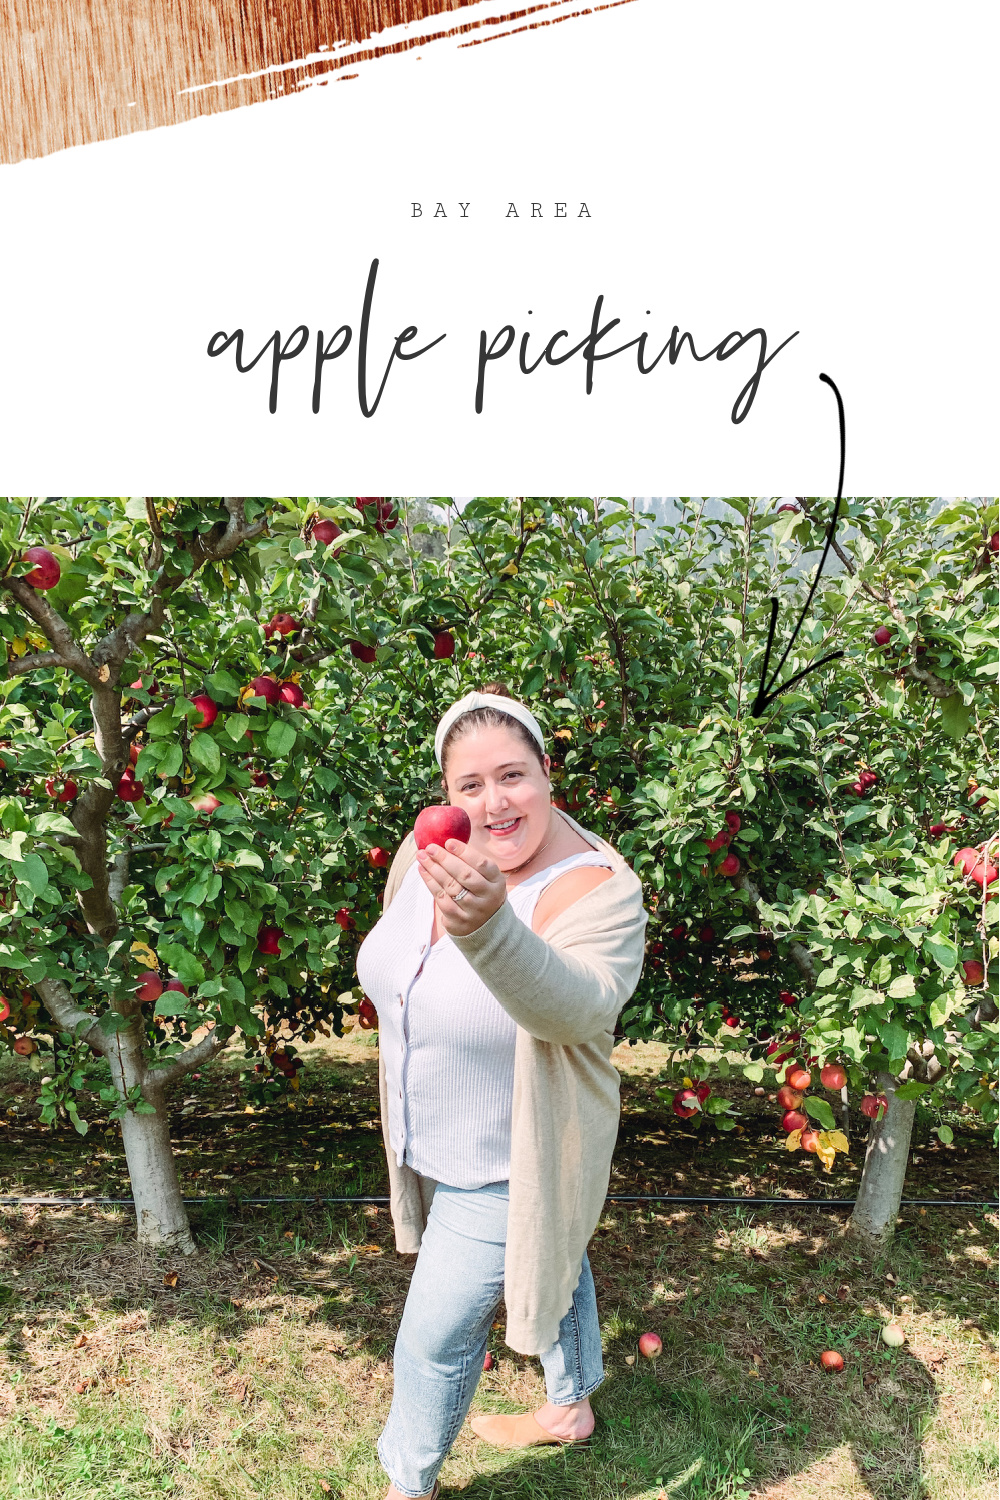 Apple Picking in the Bay Area